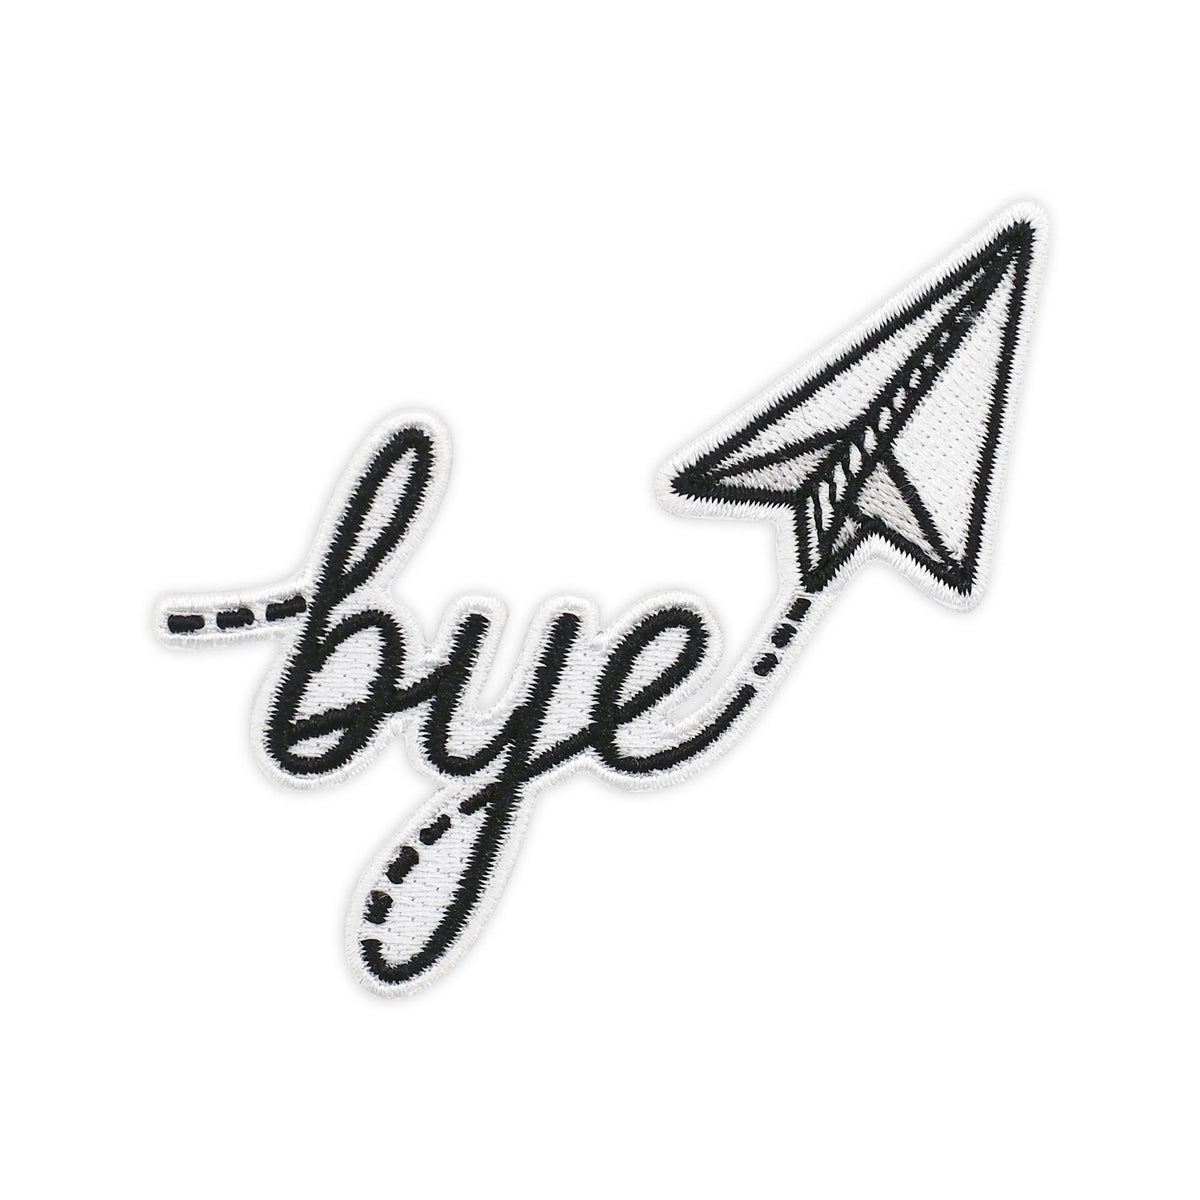 Bye Paper Airplane embroidered iron-on patch